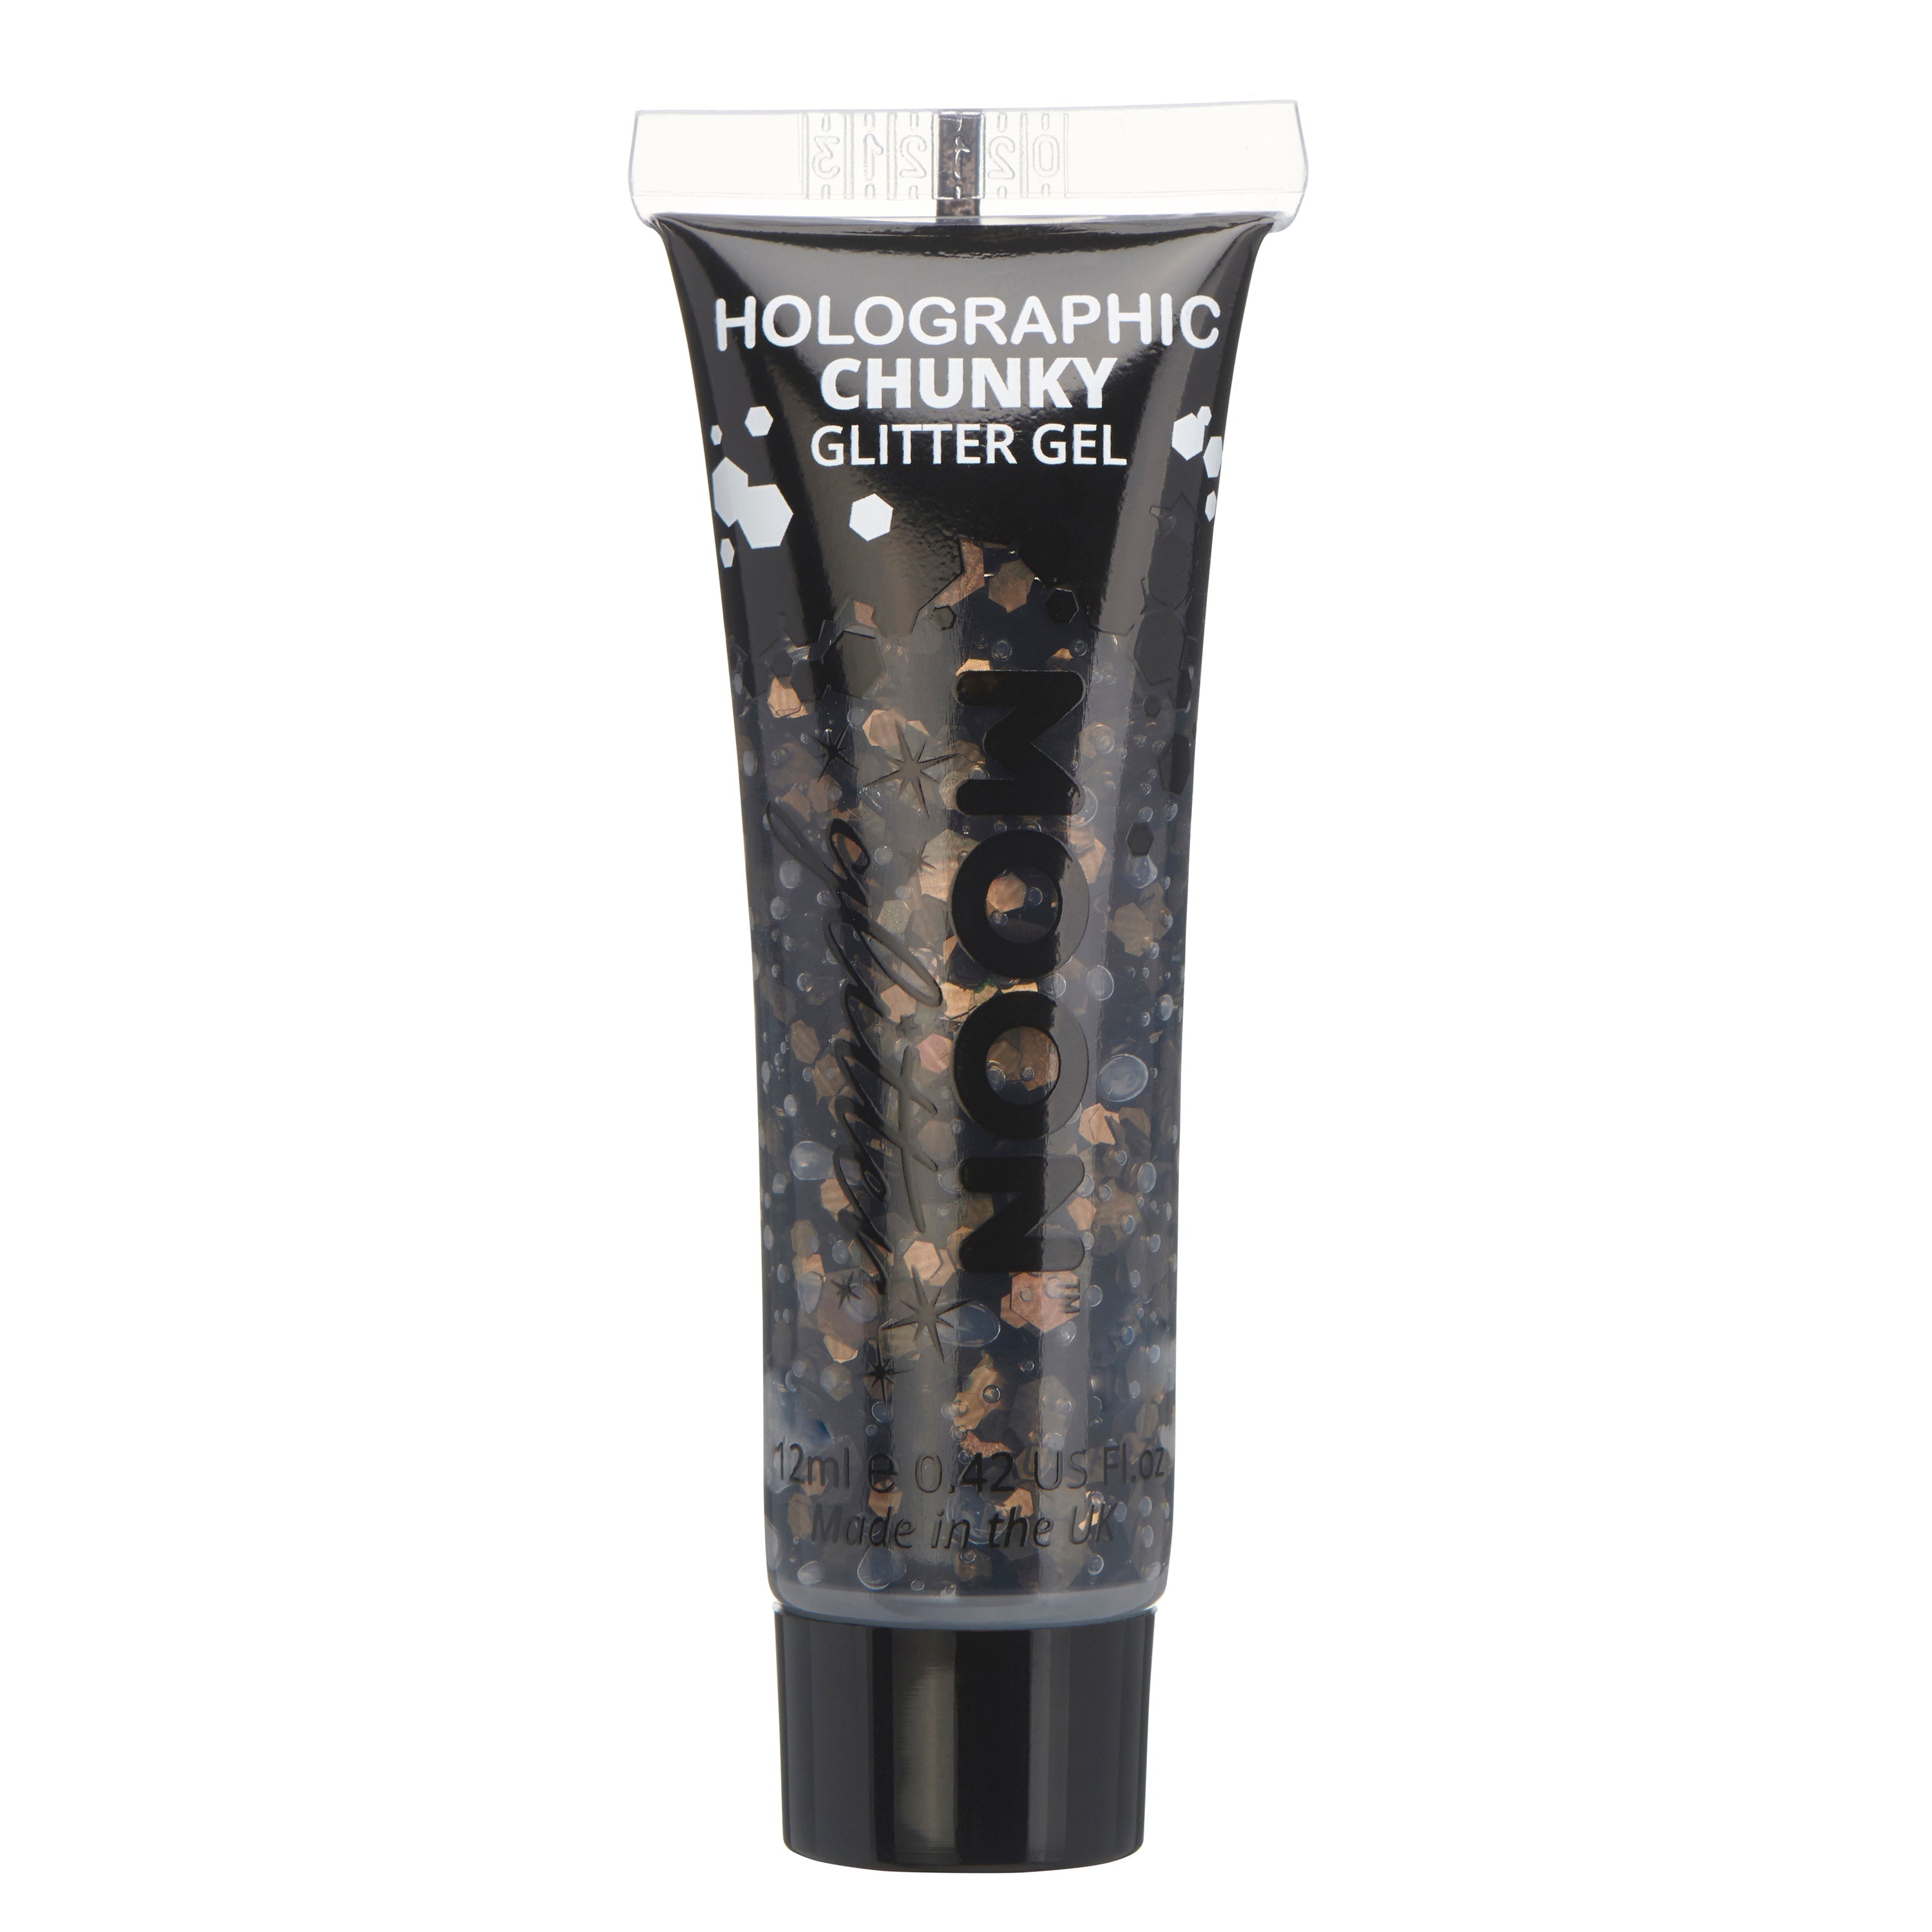 Black - Holographic Chunky Face & Body Glitter Gel, 12mL. Cosmetically certified, FDA & Health Canada compliant, cruelty free and vegan.